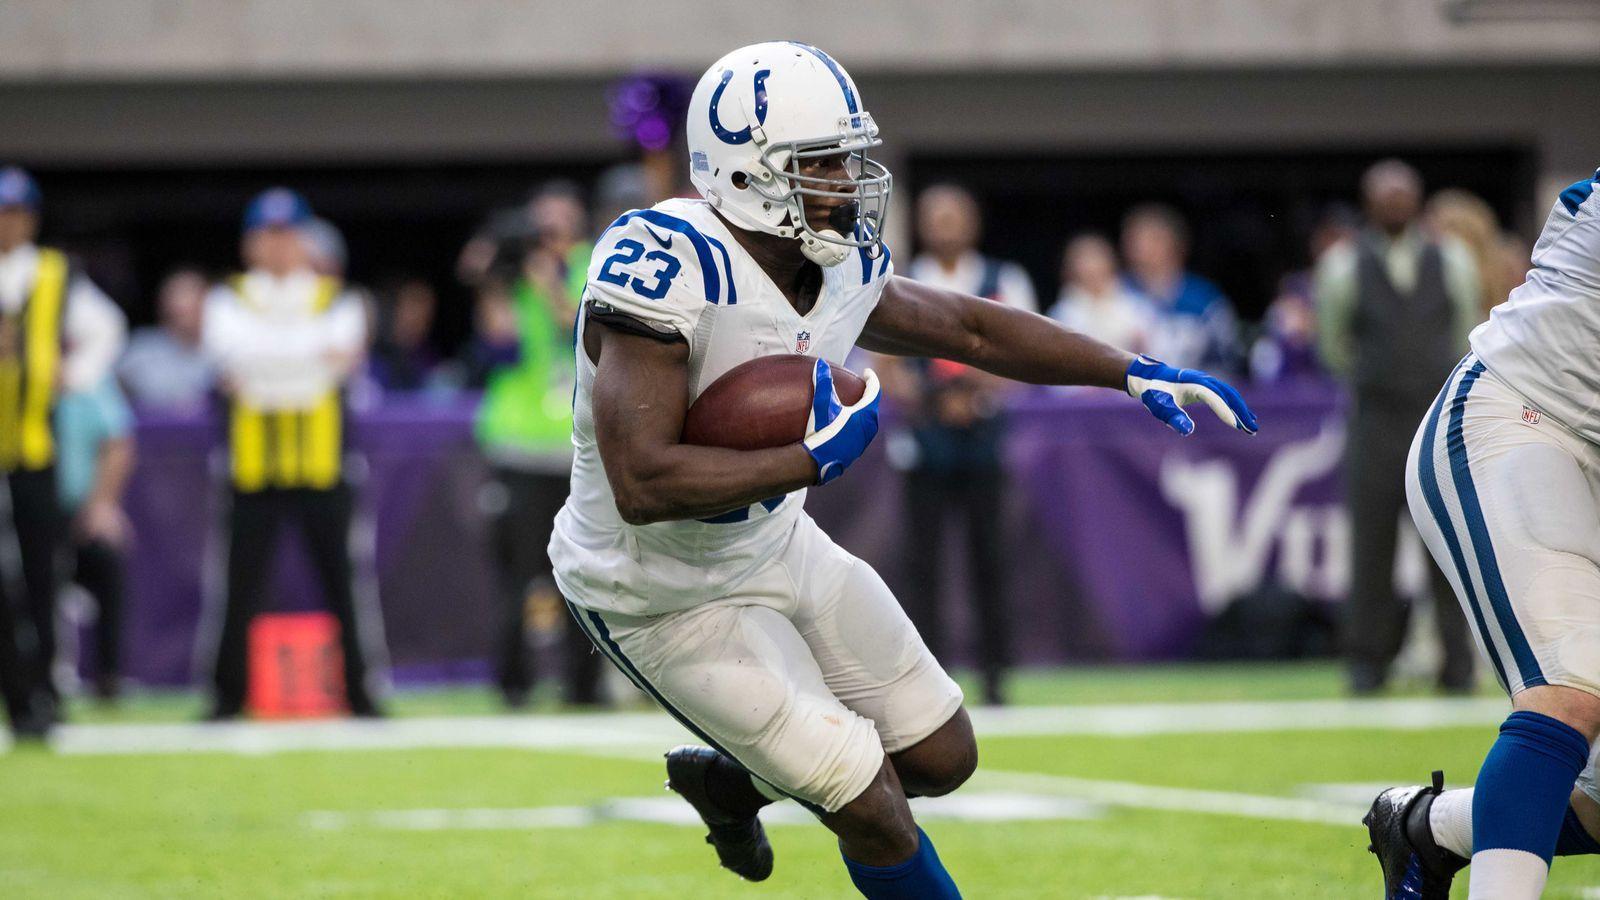 NFL preview: Can the Colts help get Frank Gore a ring